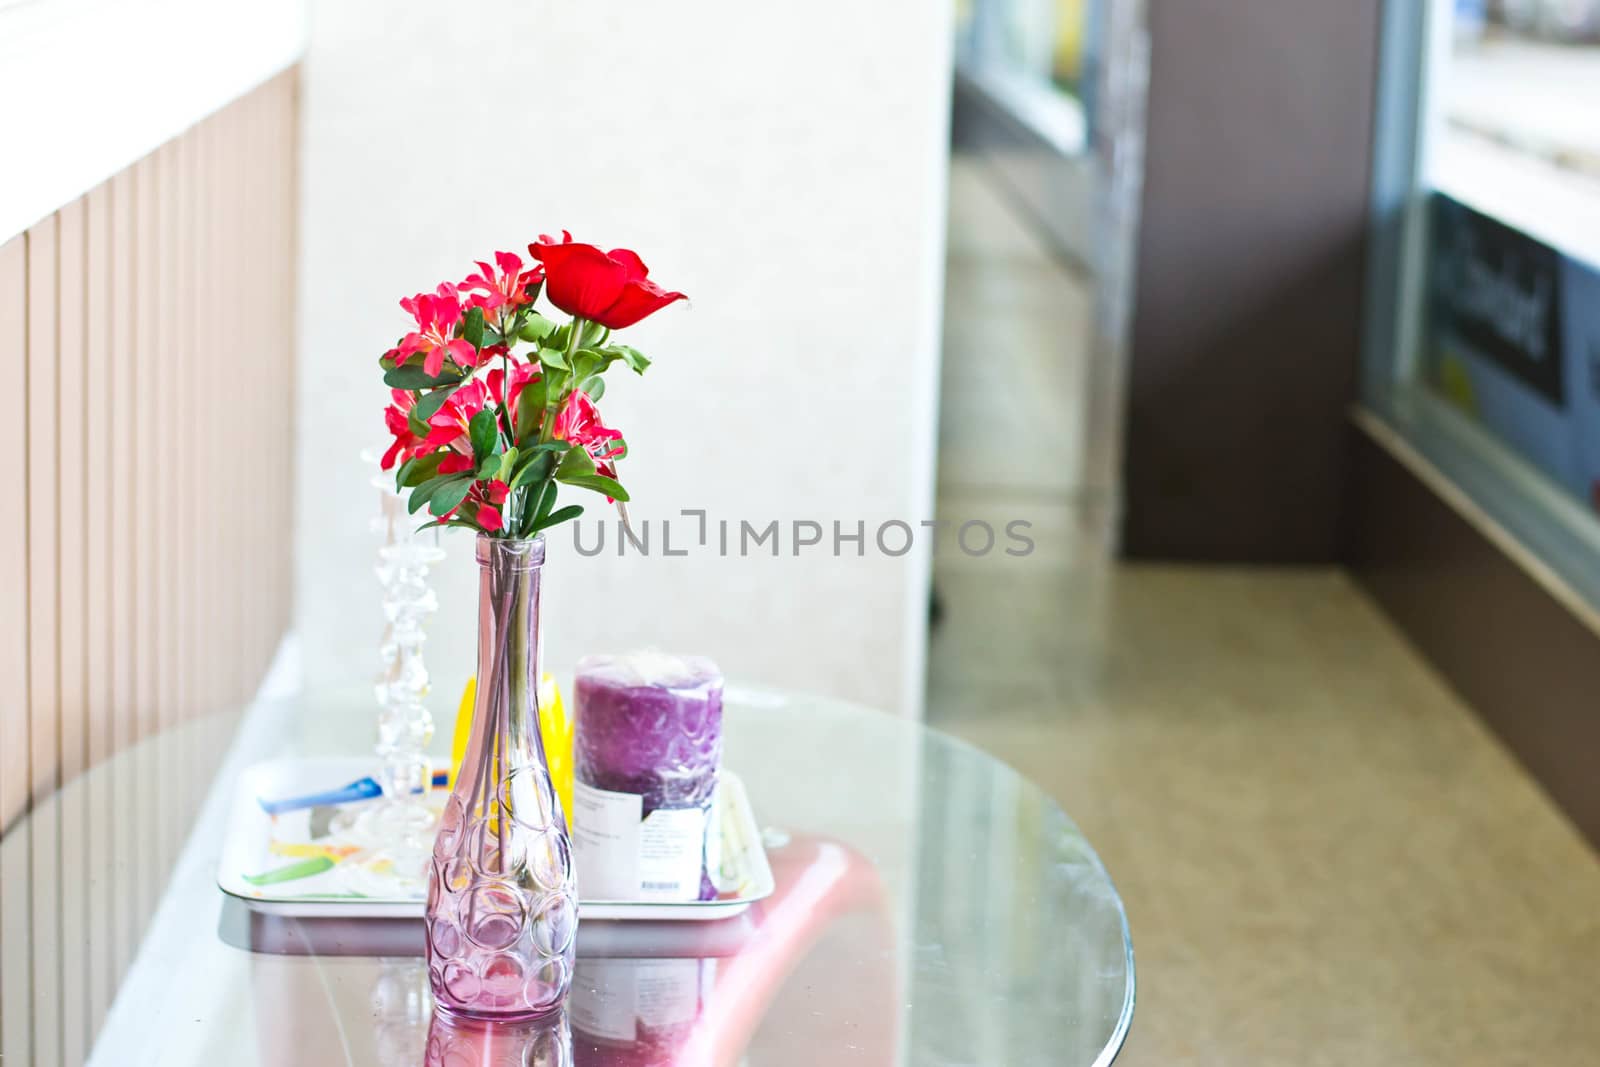 Flowers in a vase on the table